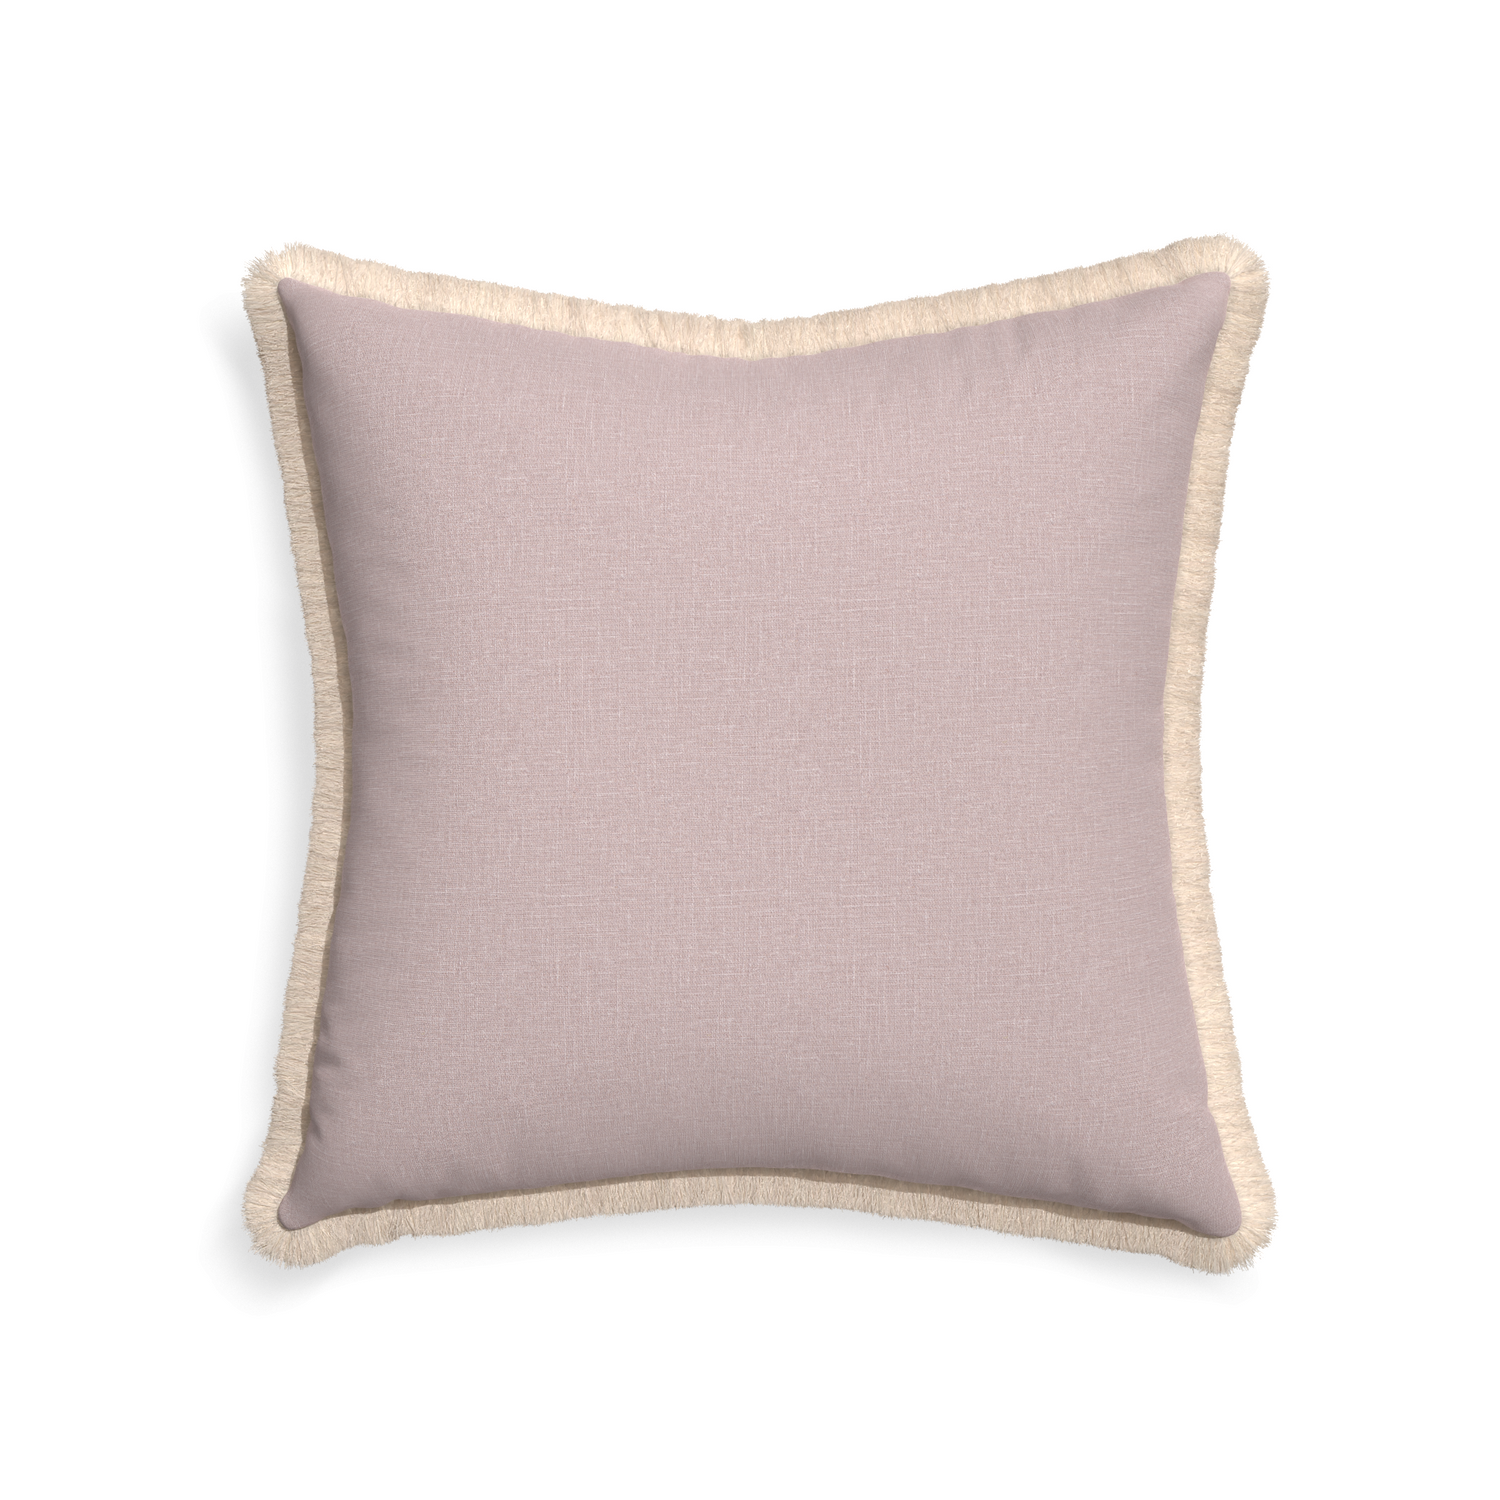 22-square orchid custom mauve pinkpillow with cream fringe on white background